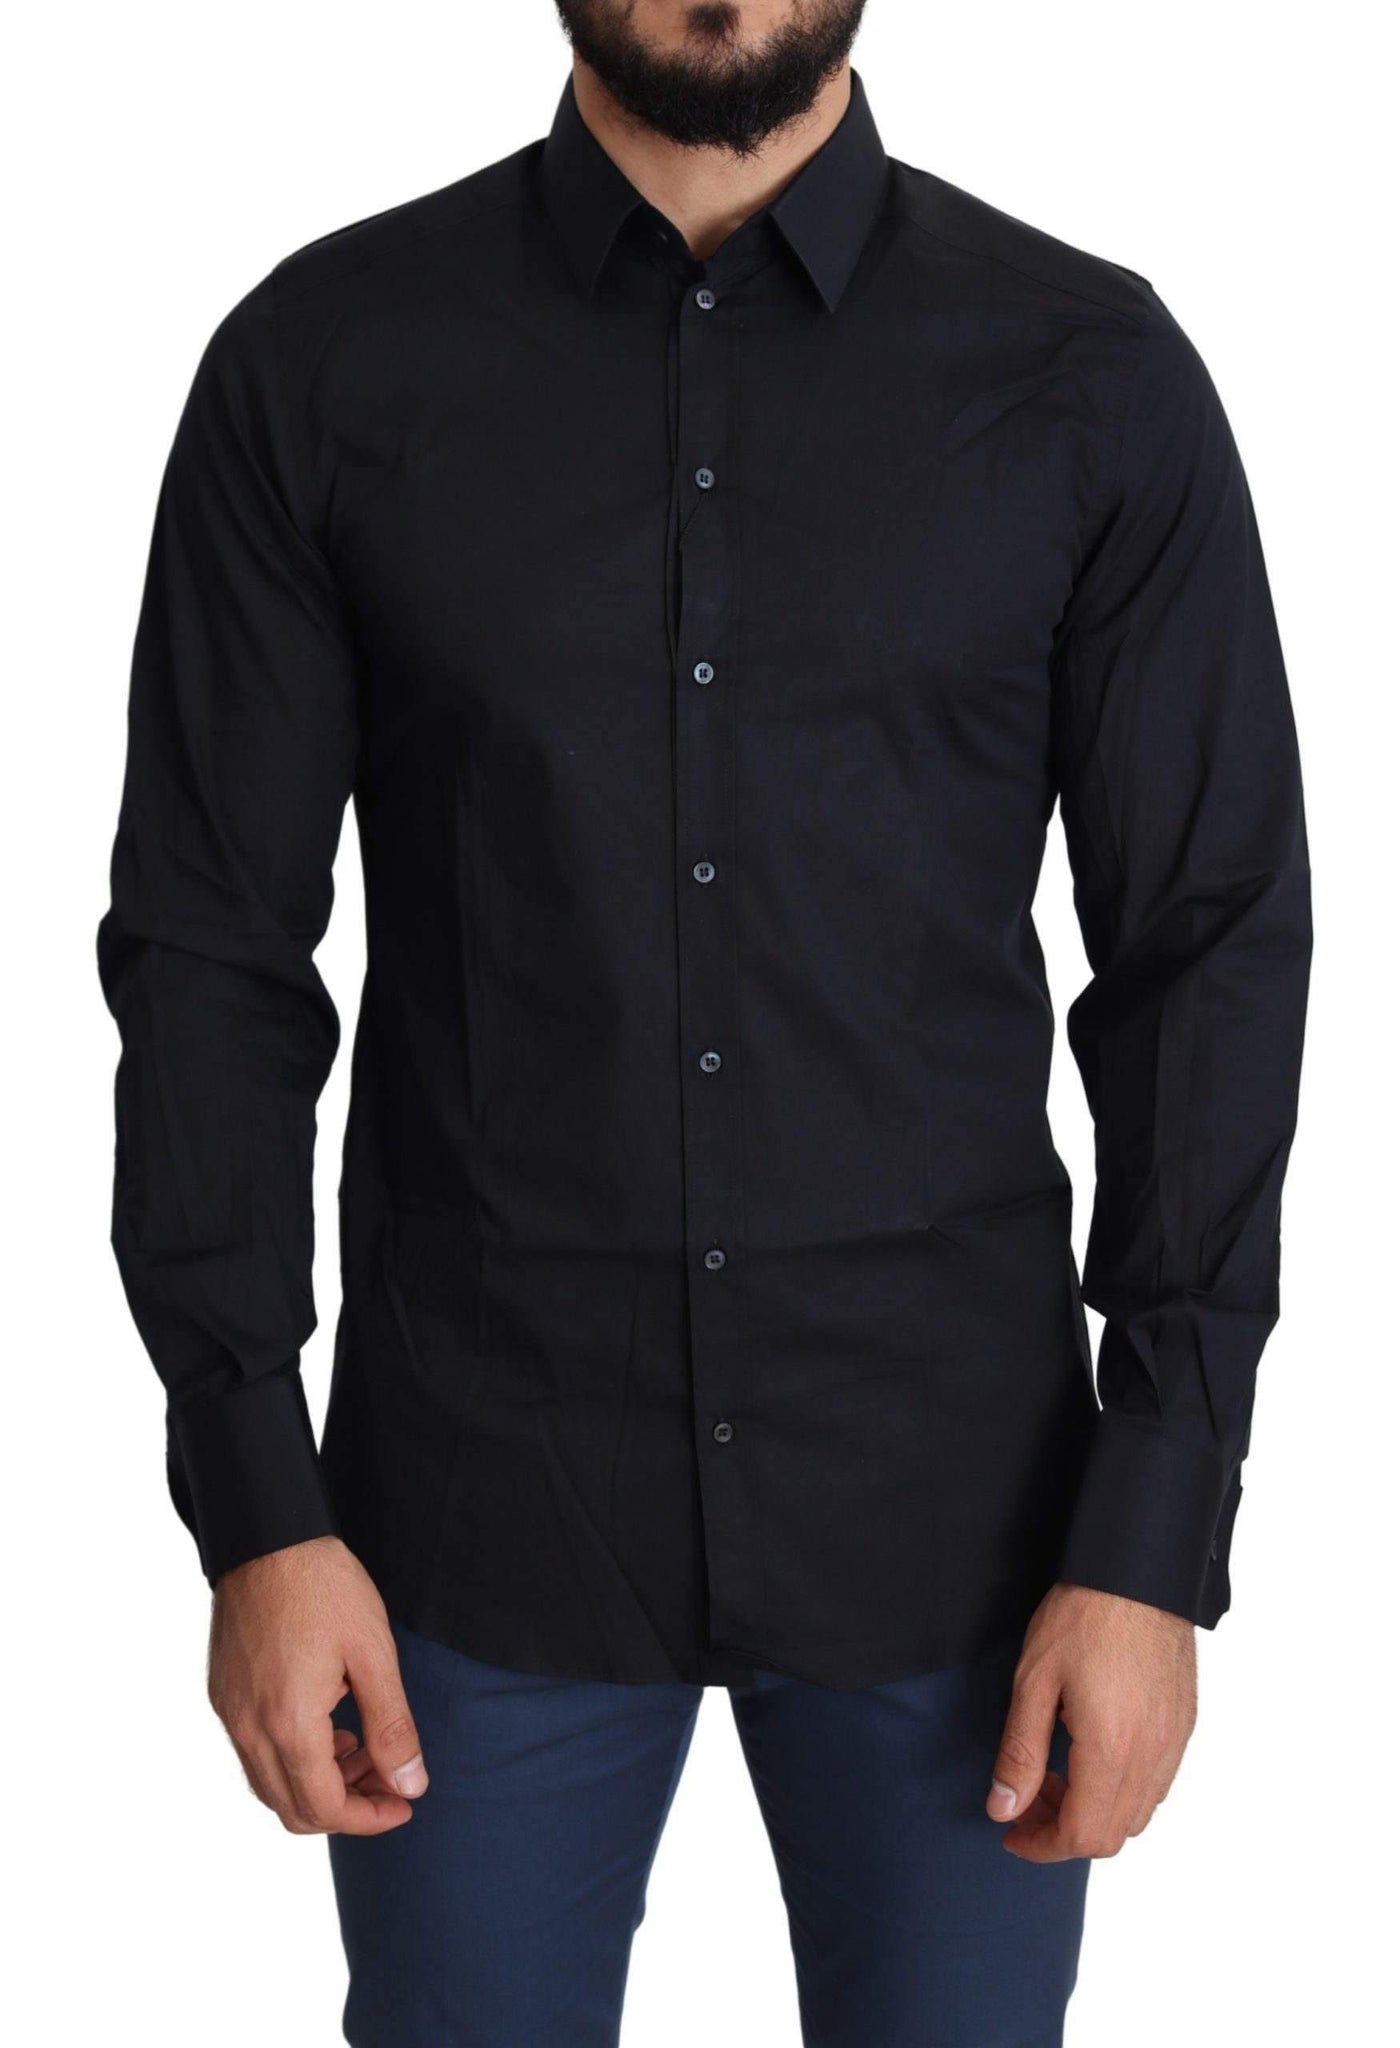 Dolce & Gabbana Black Cotton Formal GOLD Dress Shirt #men, Black, Brand_Dolce & Gabbana, Dolce & Gabbana, feed-agegroup-adult, feed-color-black, feed-gender-male, feed-size-IT38 | XS, feed-size-IT40 | M, Gender_Men, IT38 | XS, IT40 | M, Men - New Arrivals, Shirts - Men - Clothing at SEYMAYKA